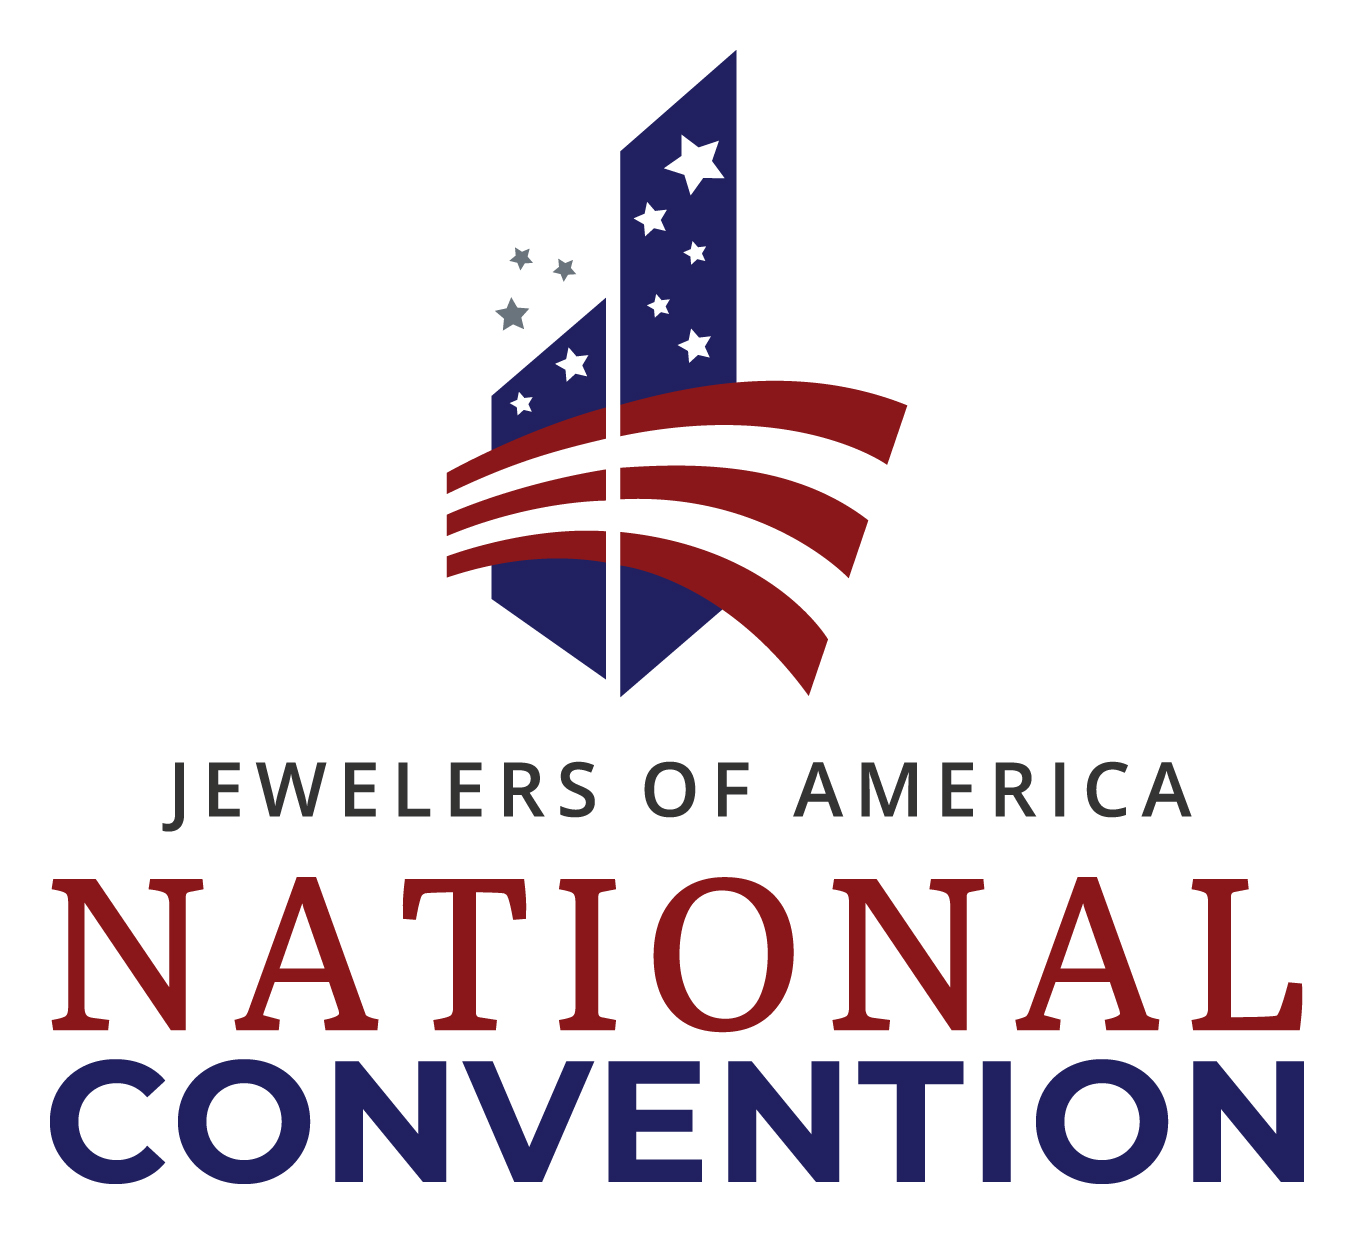 Jewelers of America National Convention